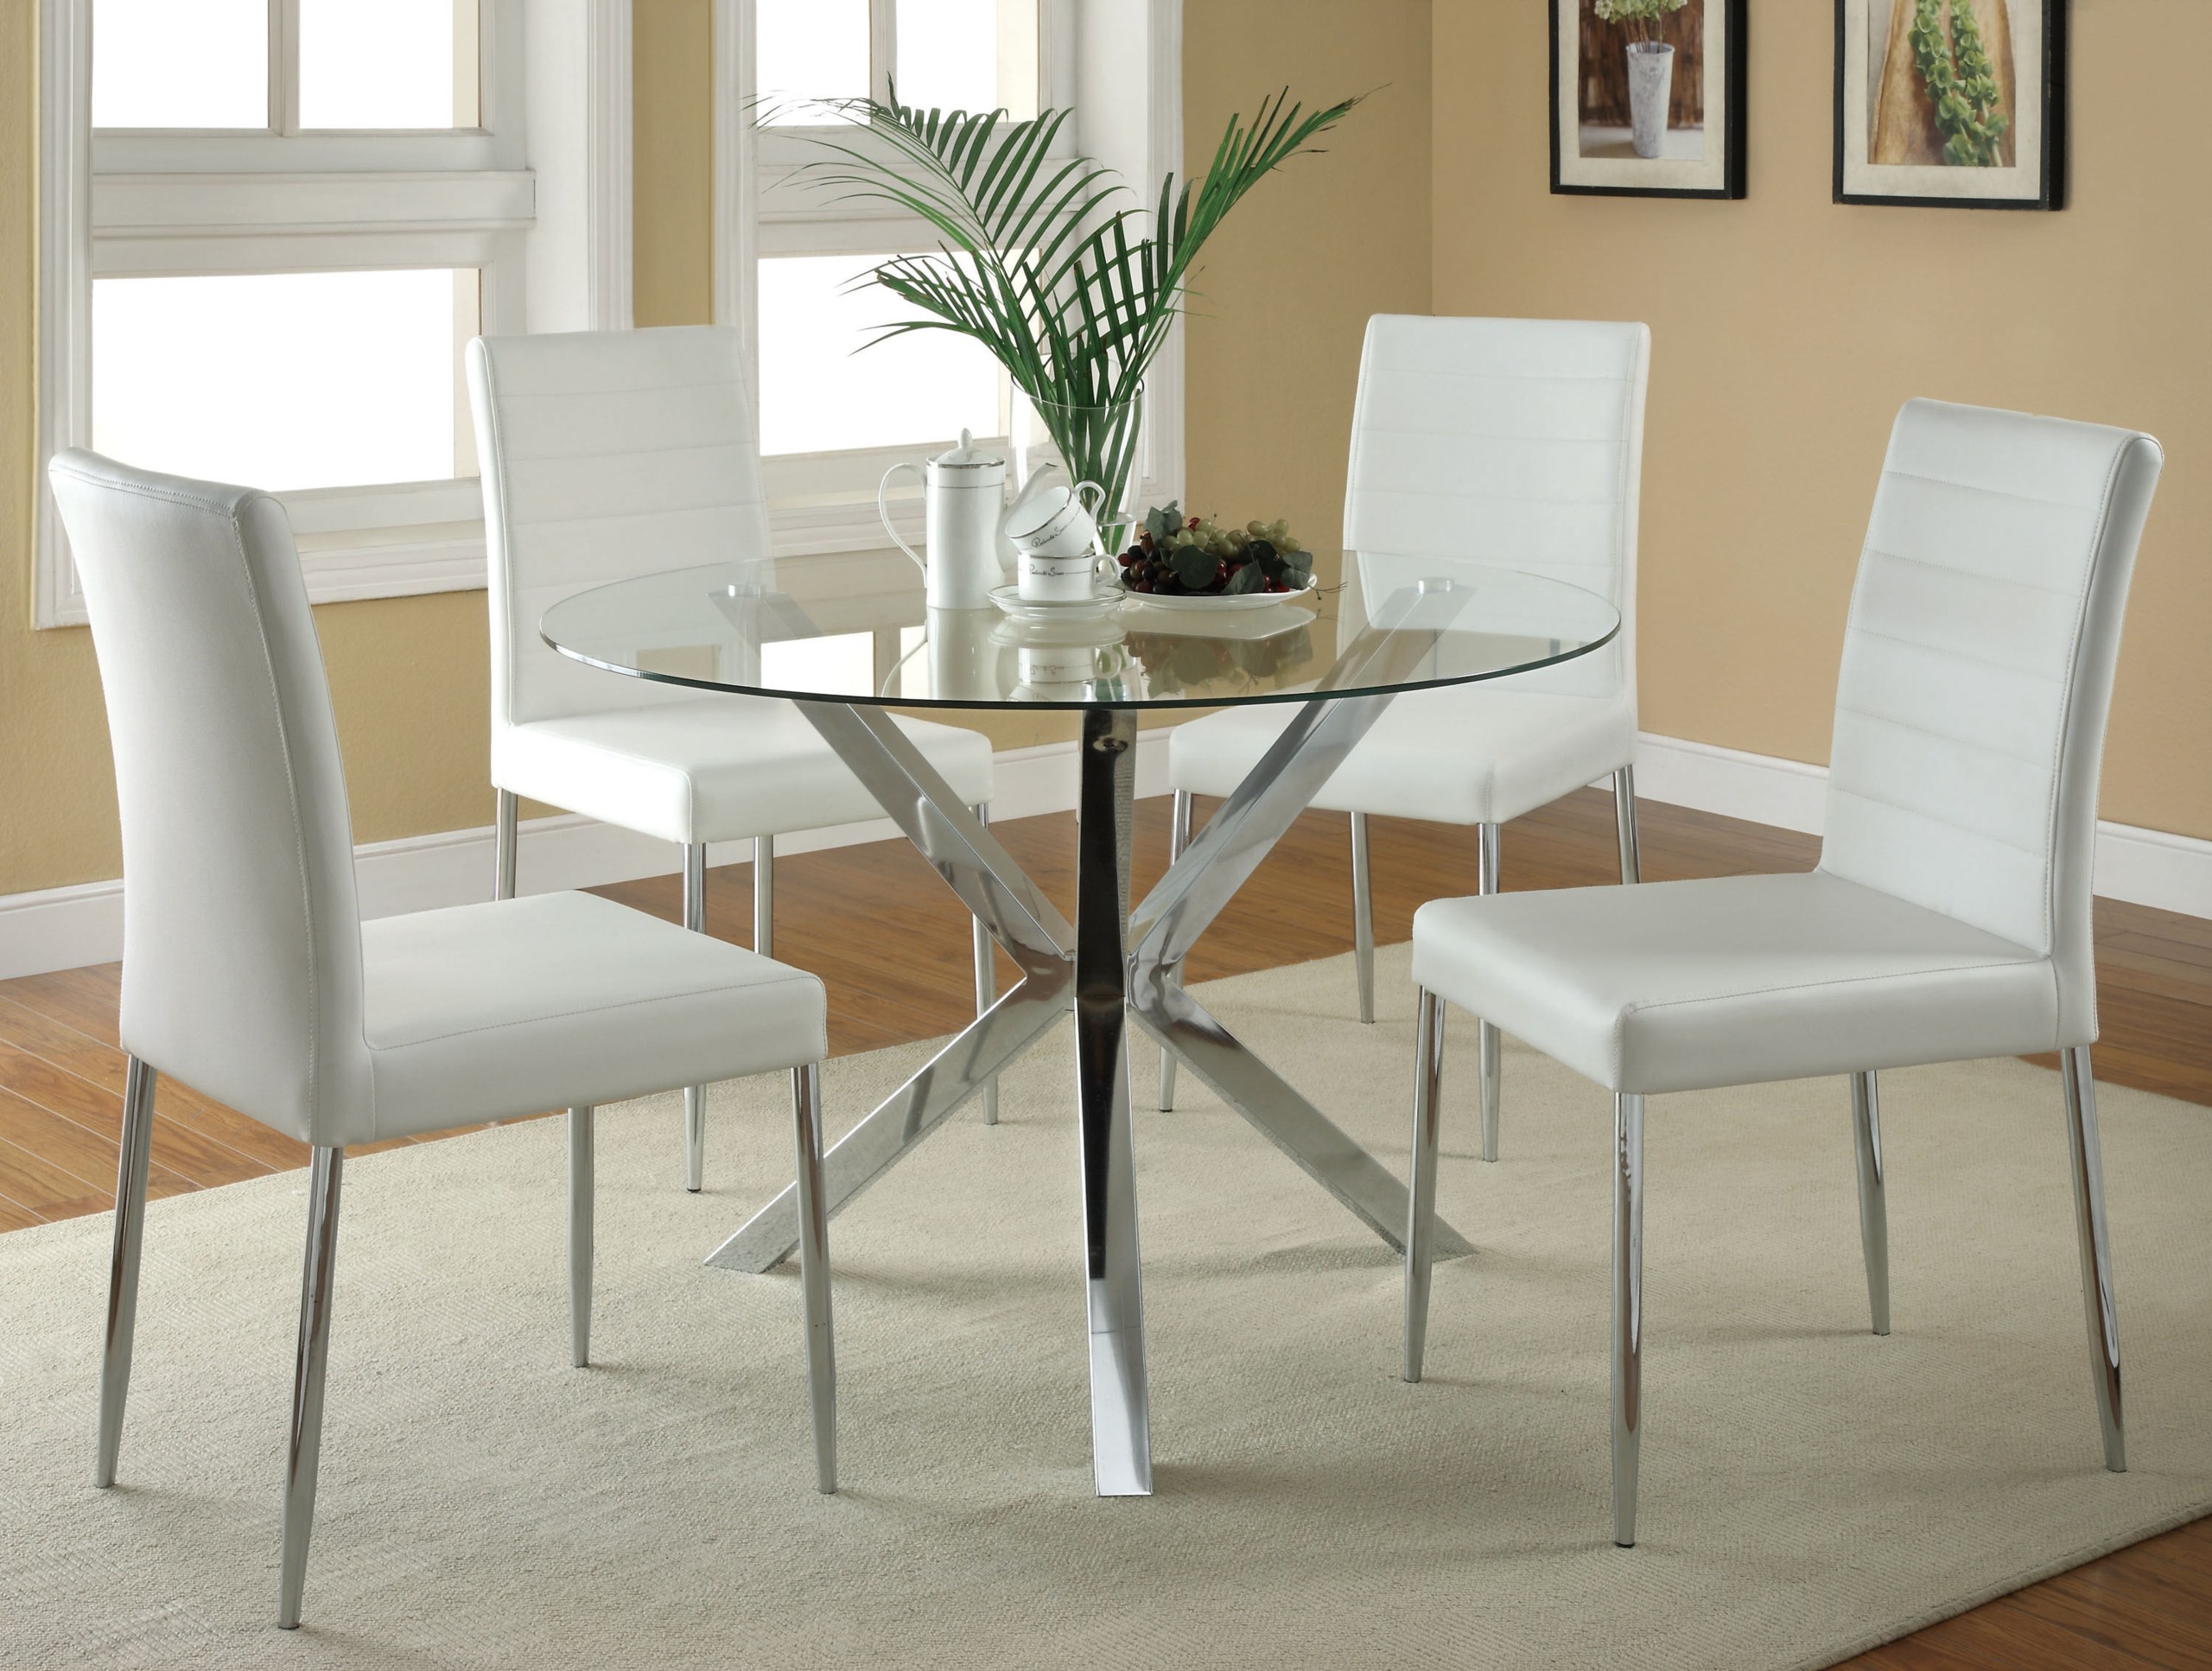 Round glass kitchen table sets